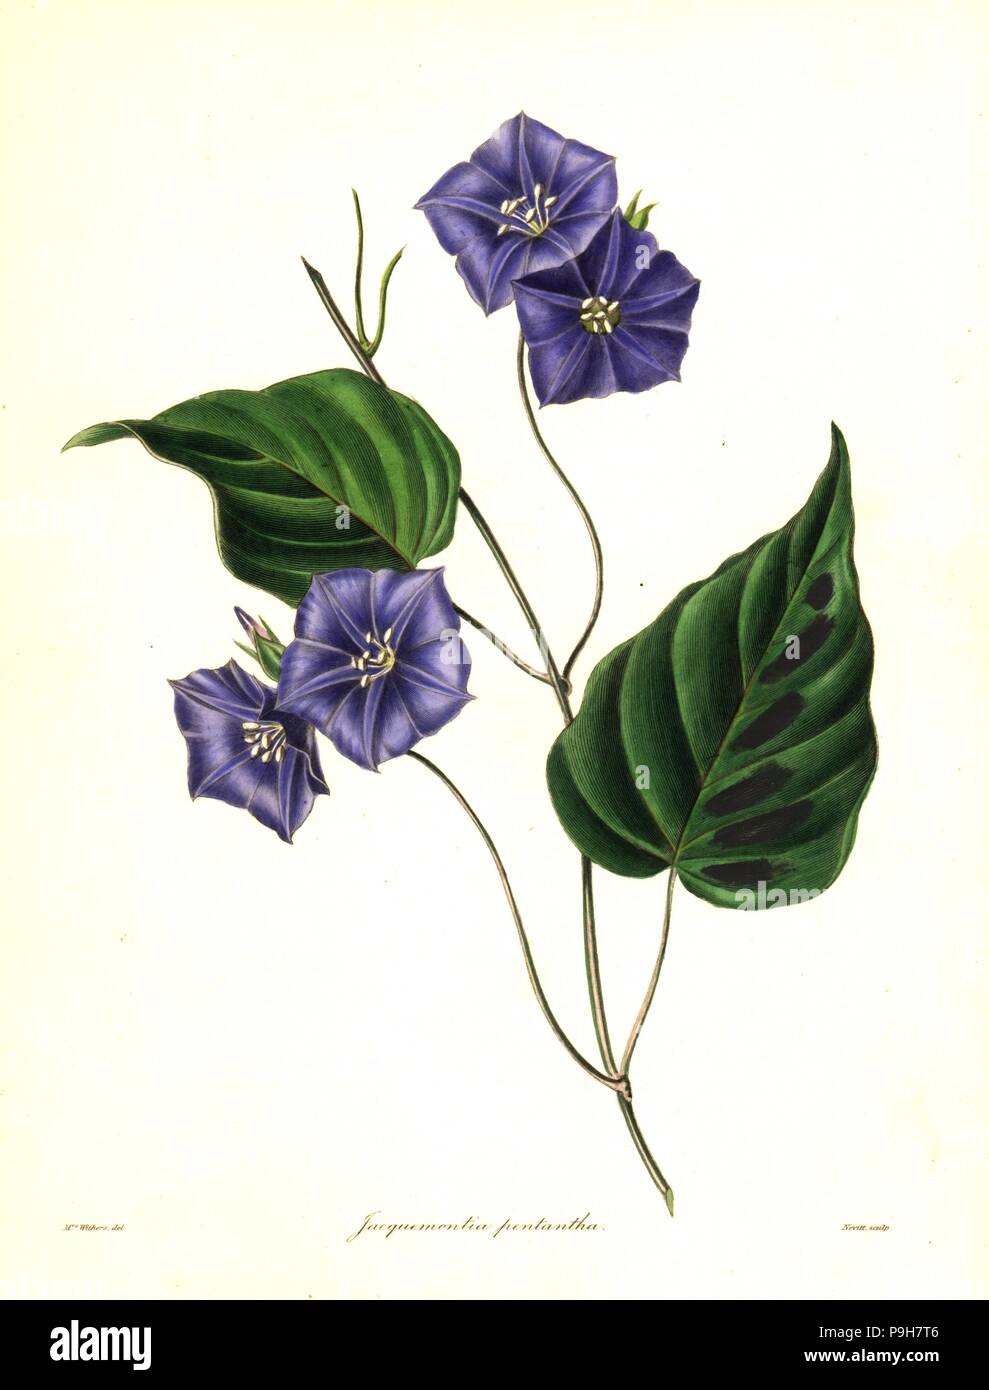 Five-flowered jacquemontia, Jacquemontia pentathos. Handcoloured copperplate engraving by S. Nevitt after a botanical illustration by Mrs Augusta Withers from Benjamin Maund and the Rev. John Stevens Henslow's The Botanist, London, 1836. Stock Photo